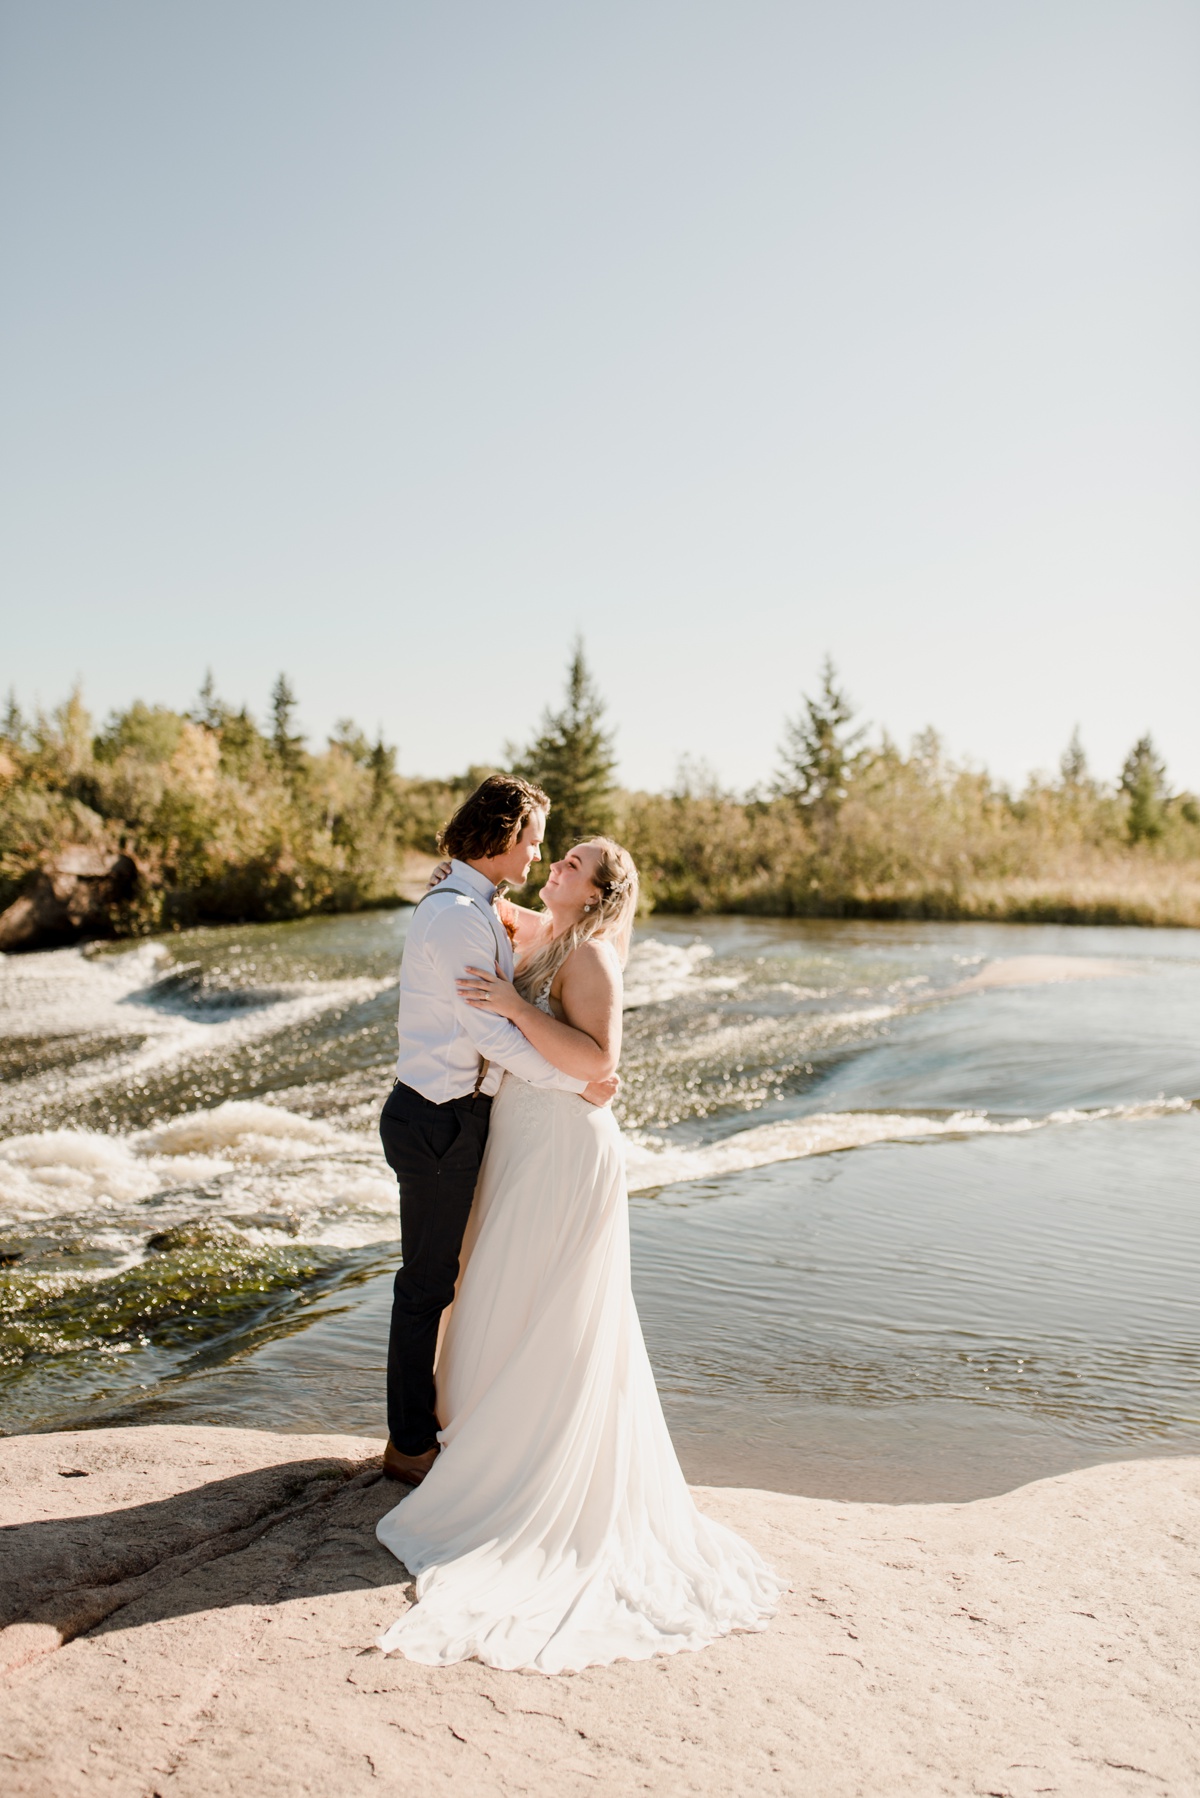 how to edit photos consistently, photo editing education by Vanessa Renae Photography, a Winnipeg wedding photographer